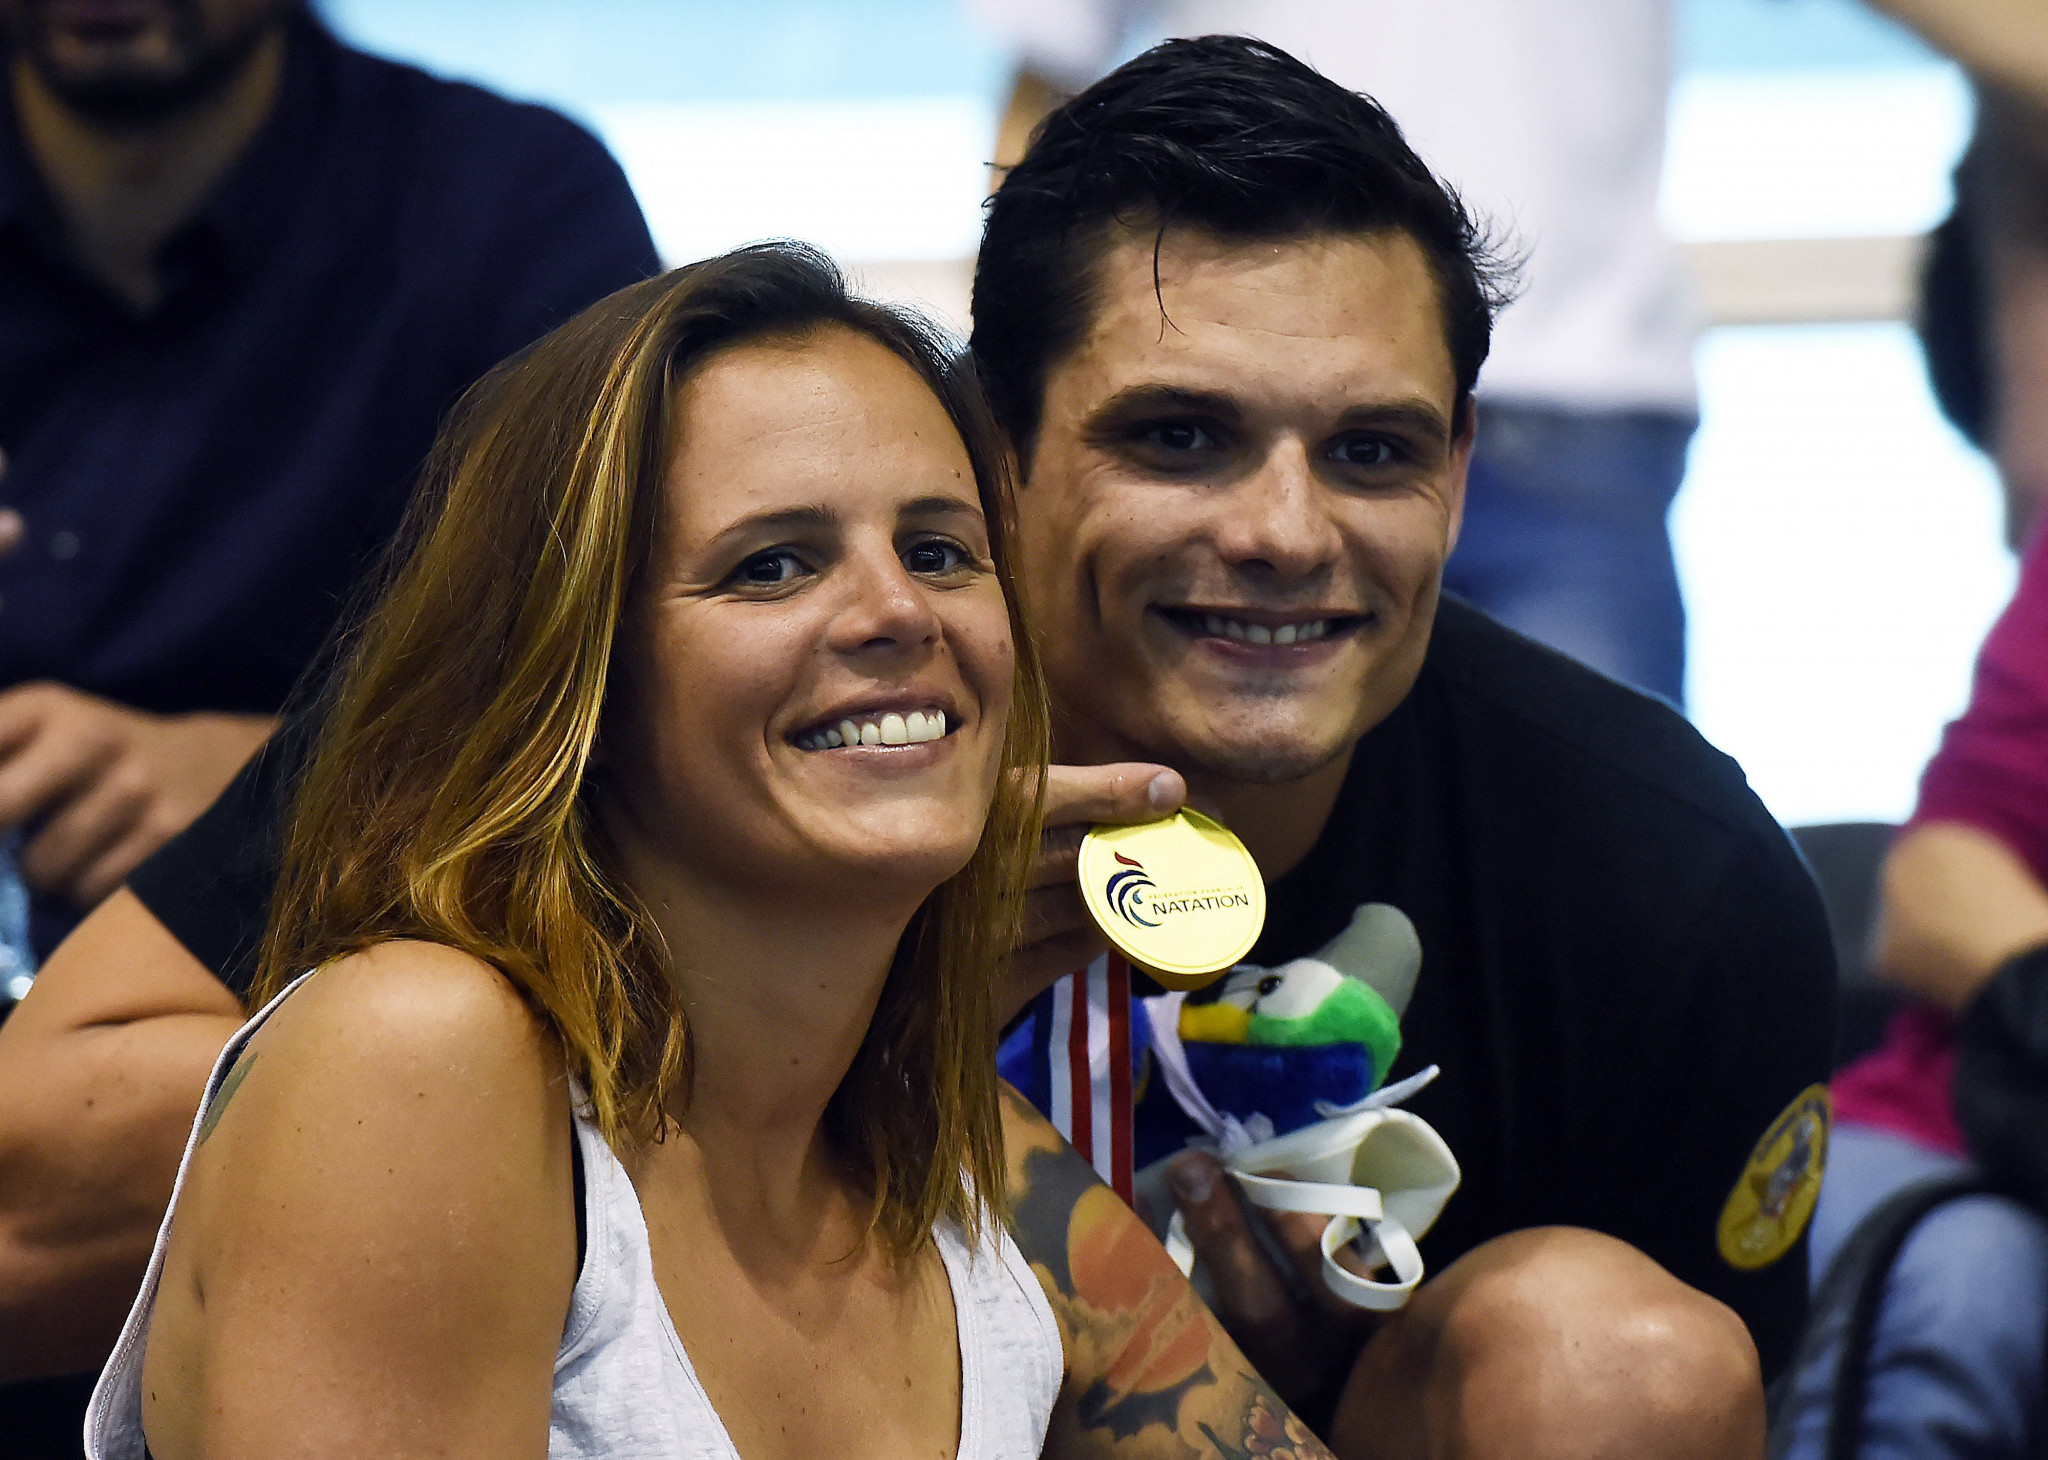 Laure and Florent Manaudou have been named as super ambassadors for the Paris 2024 Olympic Torch Relay ©Getty Images